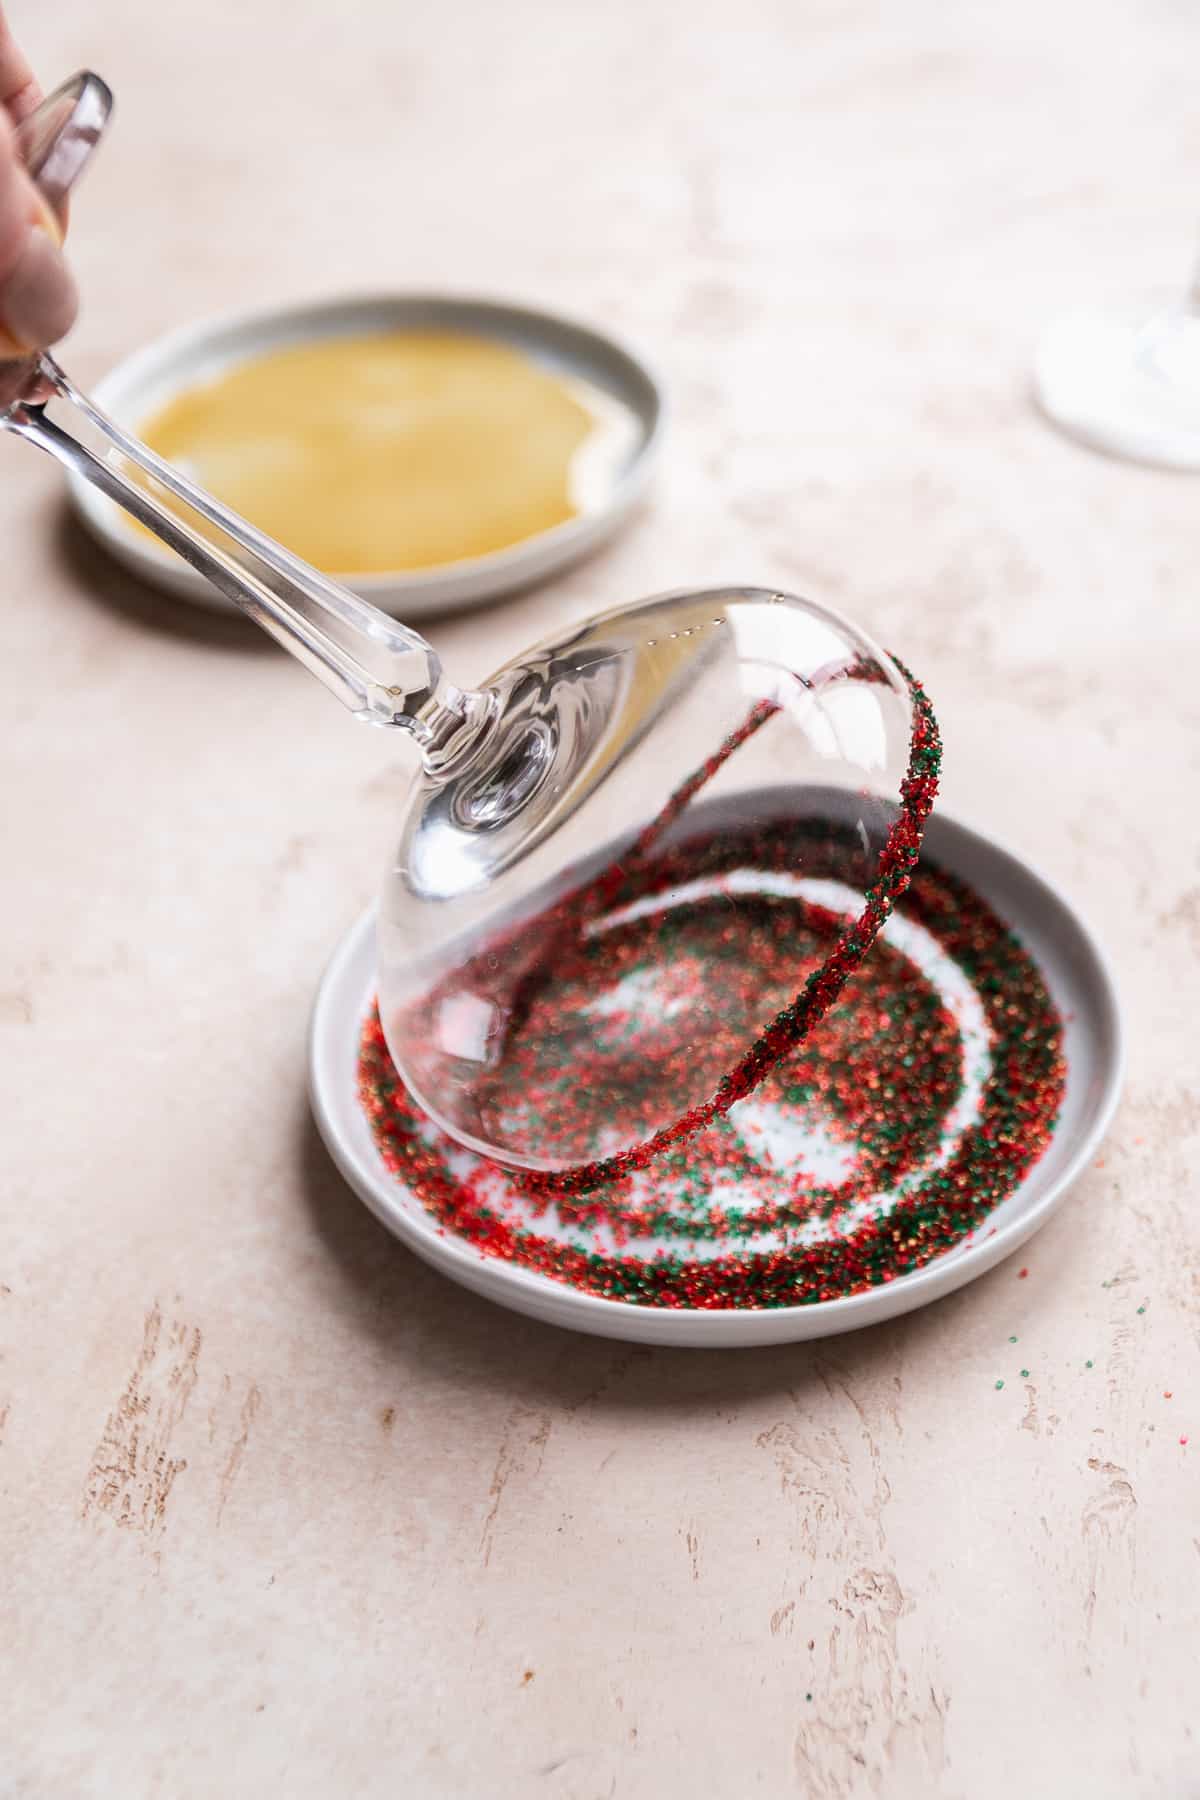 Martini glass being rimmed in sprinkles.